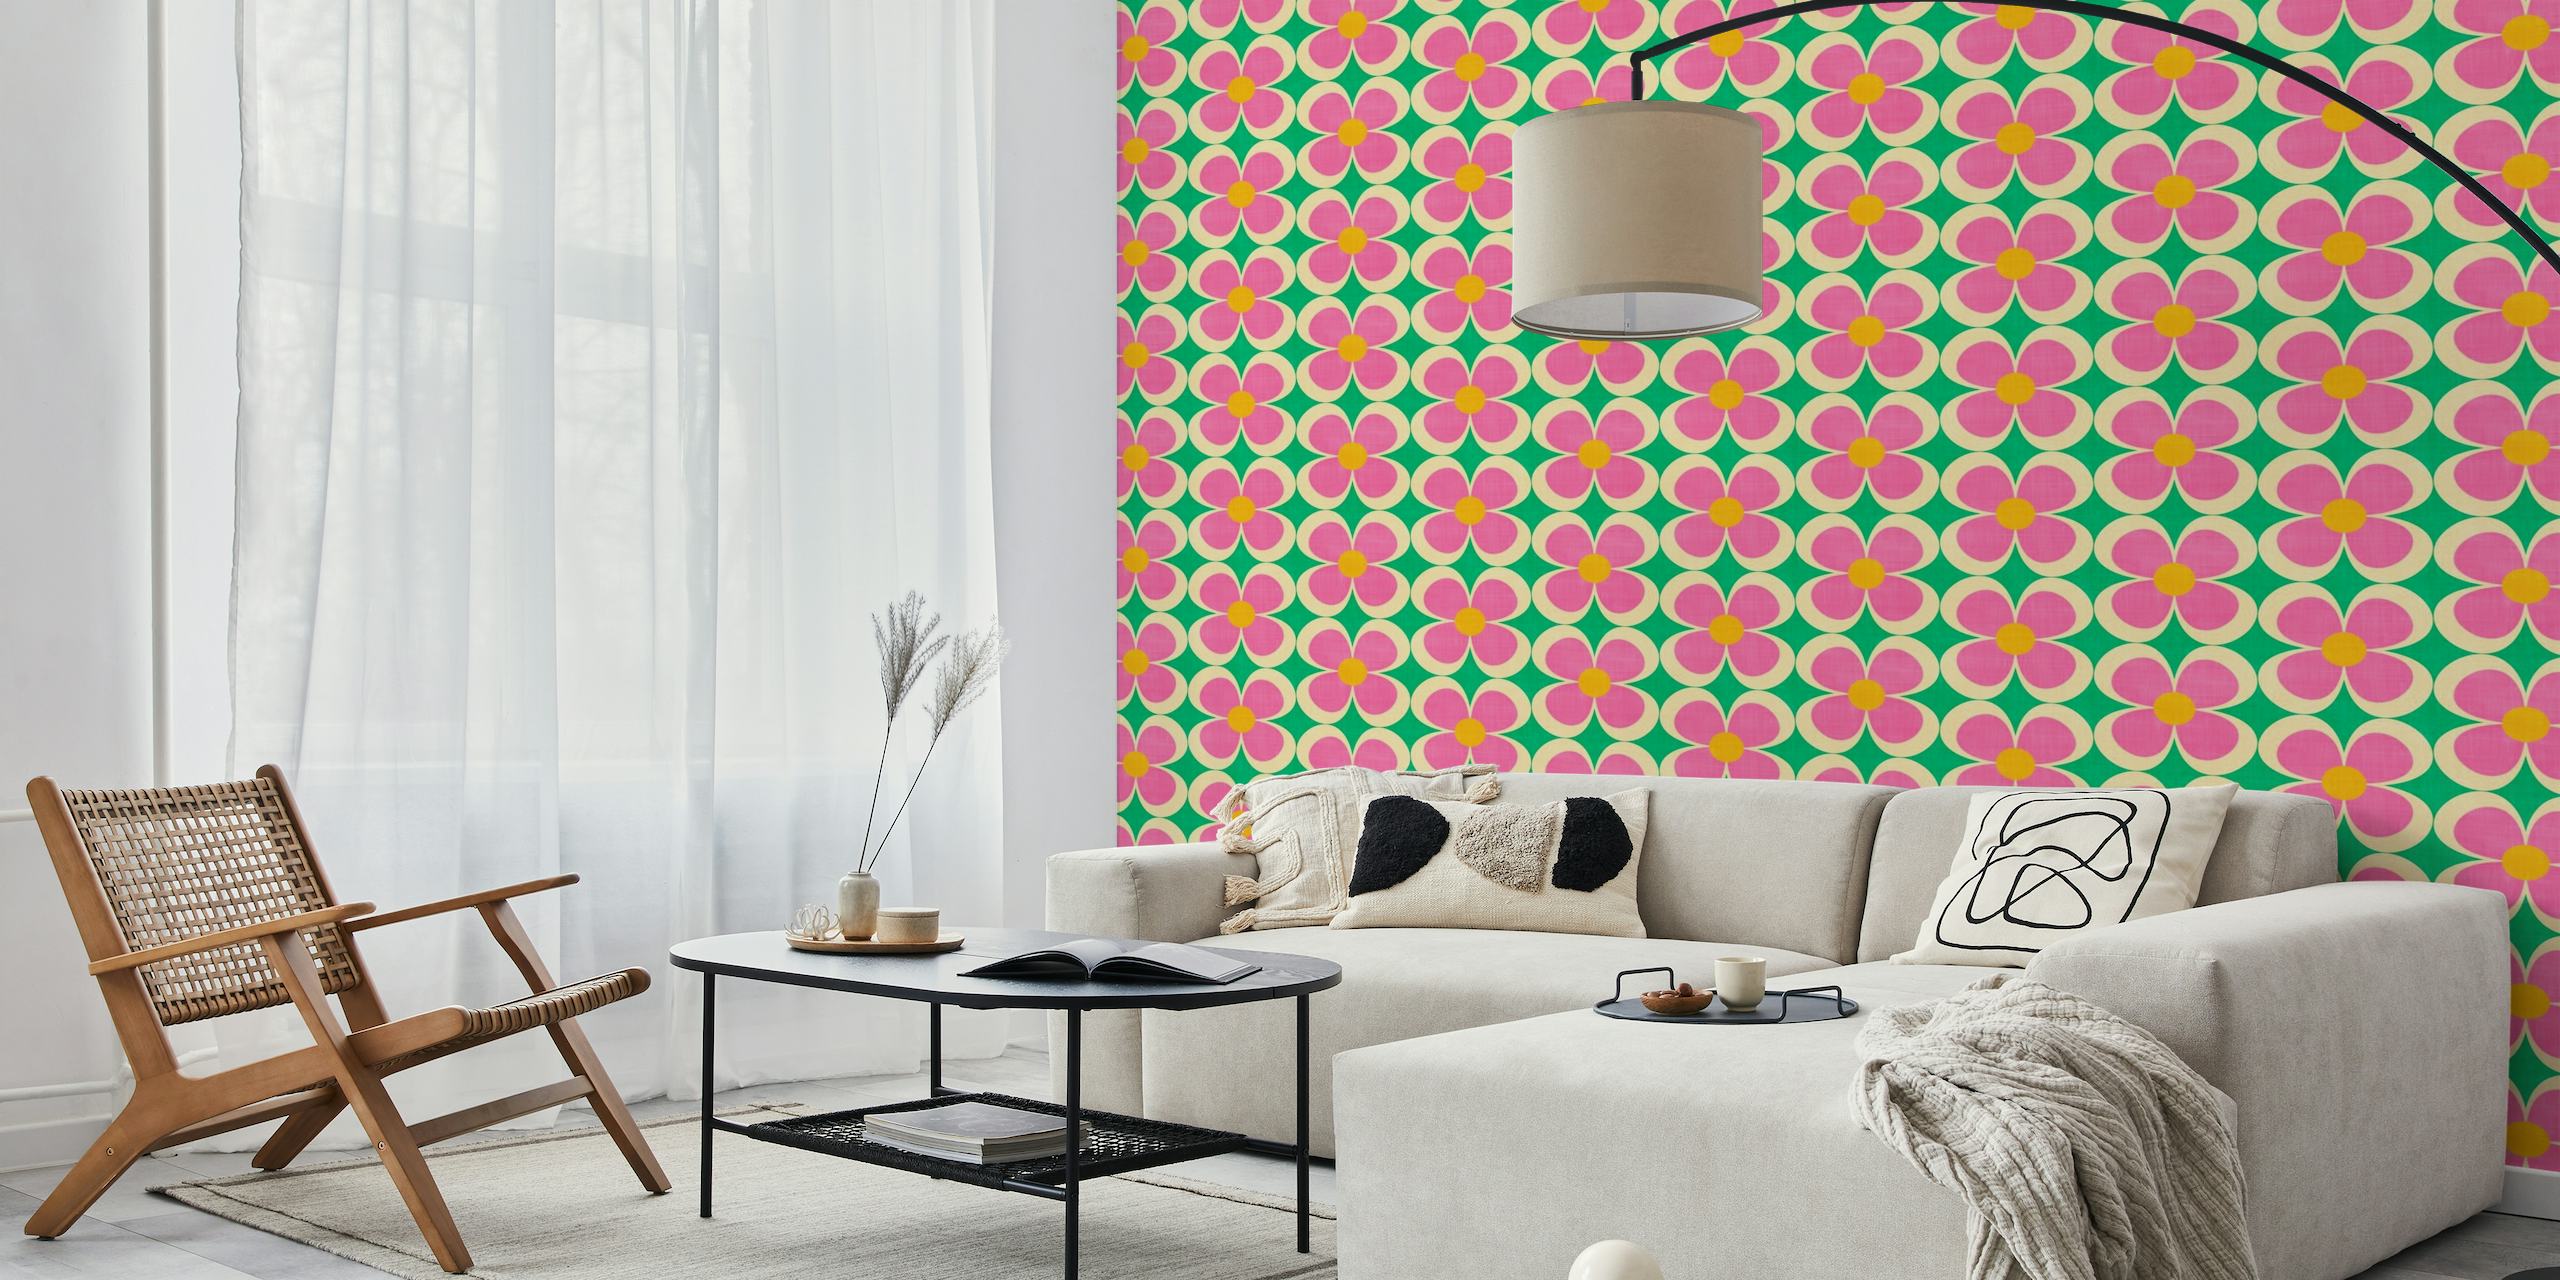 Groovy Geometric Floral Pink and Green Small behang